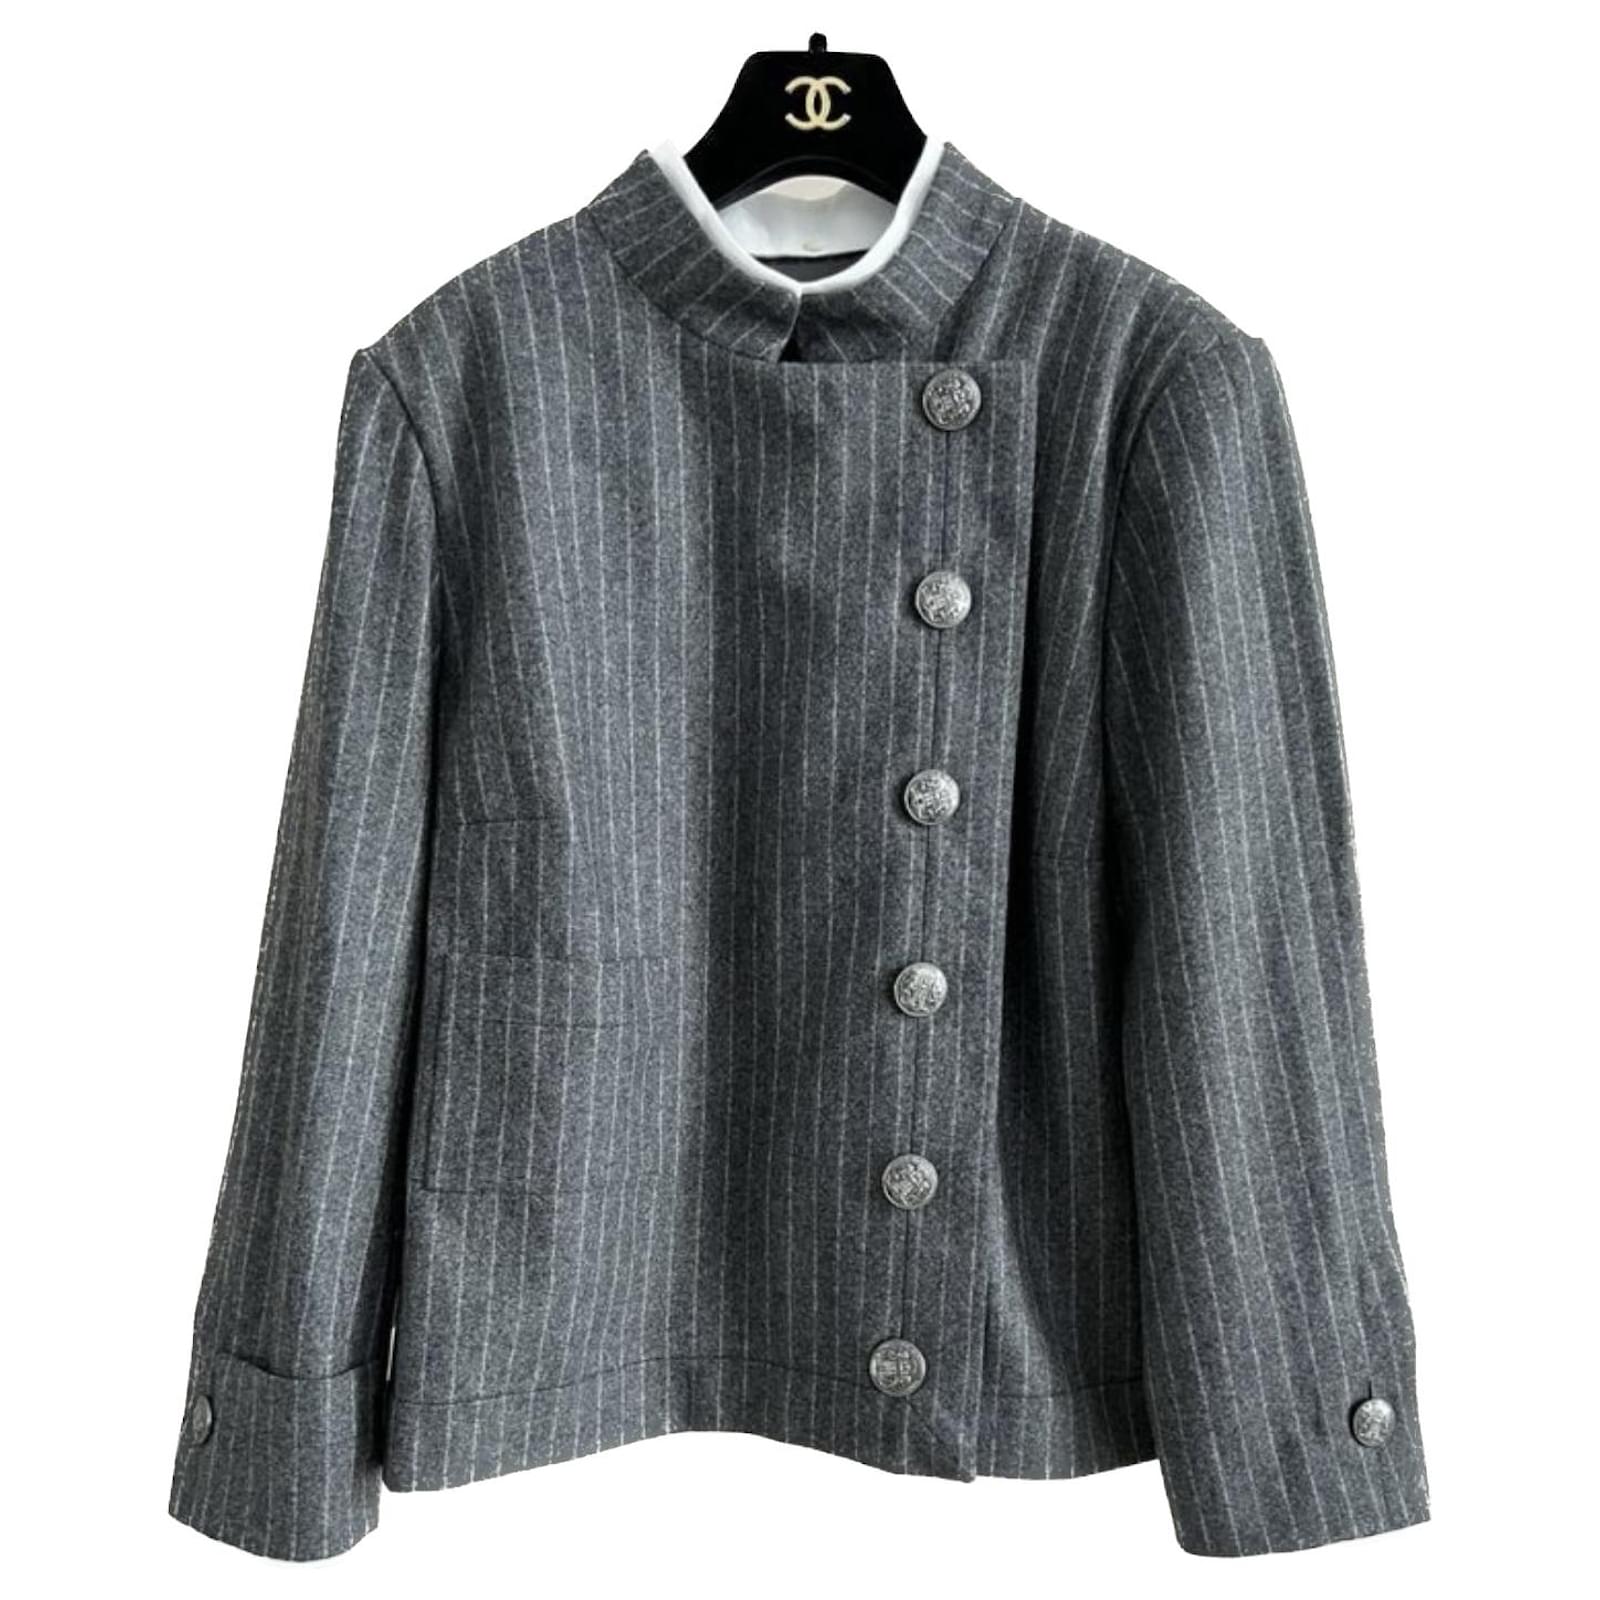 NEW CHANEL 18A HAMBURG NAVY BLUE WHITE CC BUTTONS WOOL TWEED JACKET COAT 34